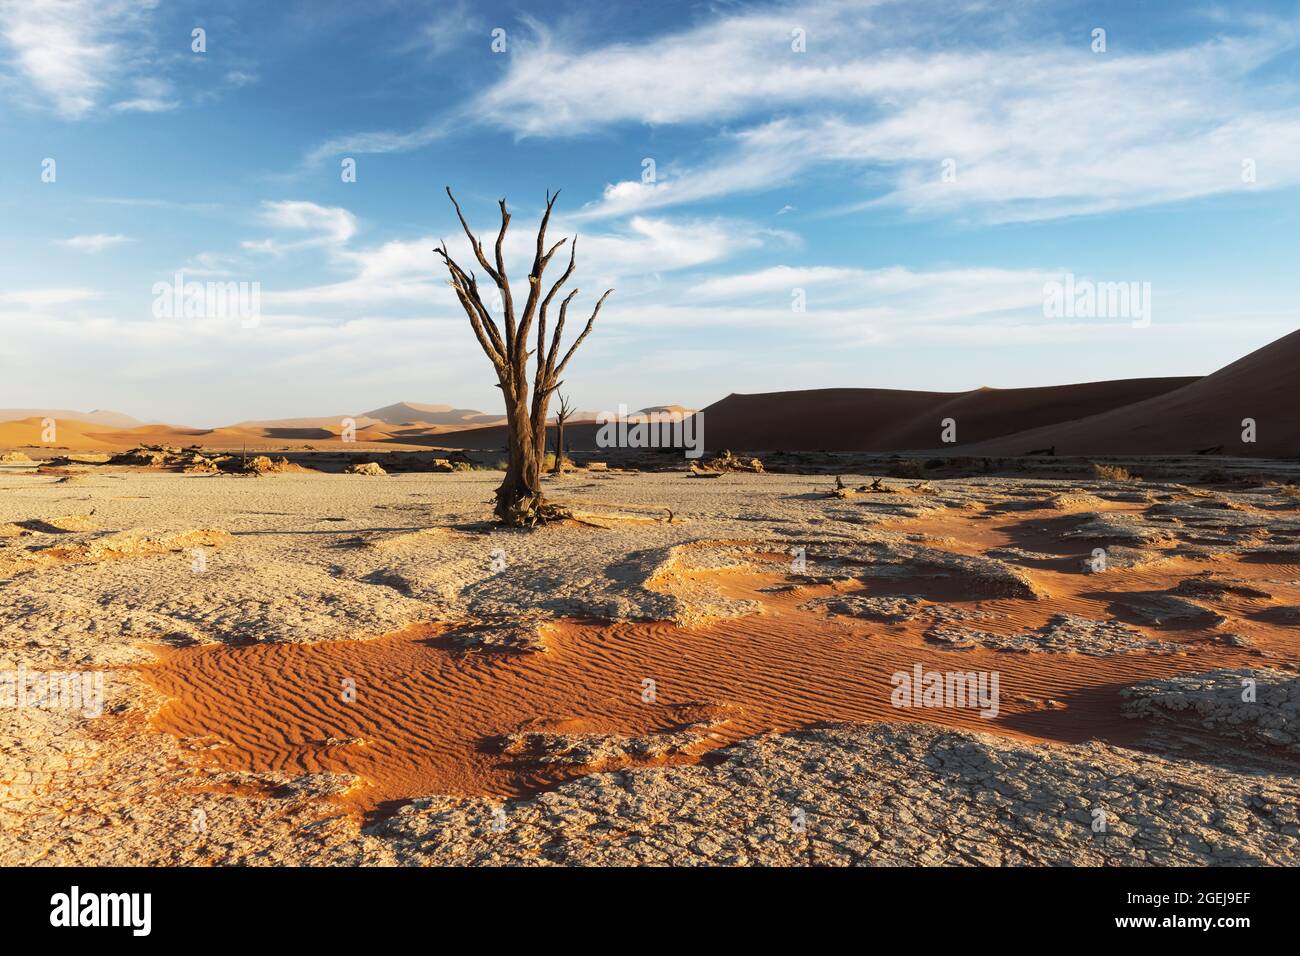 Dead Camelthorn Trees at sunrise, Deadvlei, Namib-Naukluft National Park, Namibia, Africa. Dried trees in Namib desert. Landscape photography Stock Photo